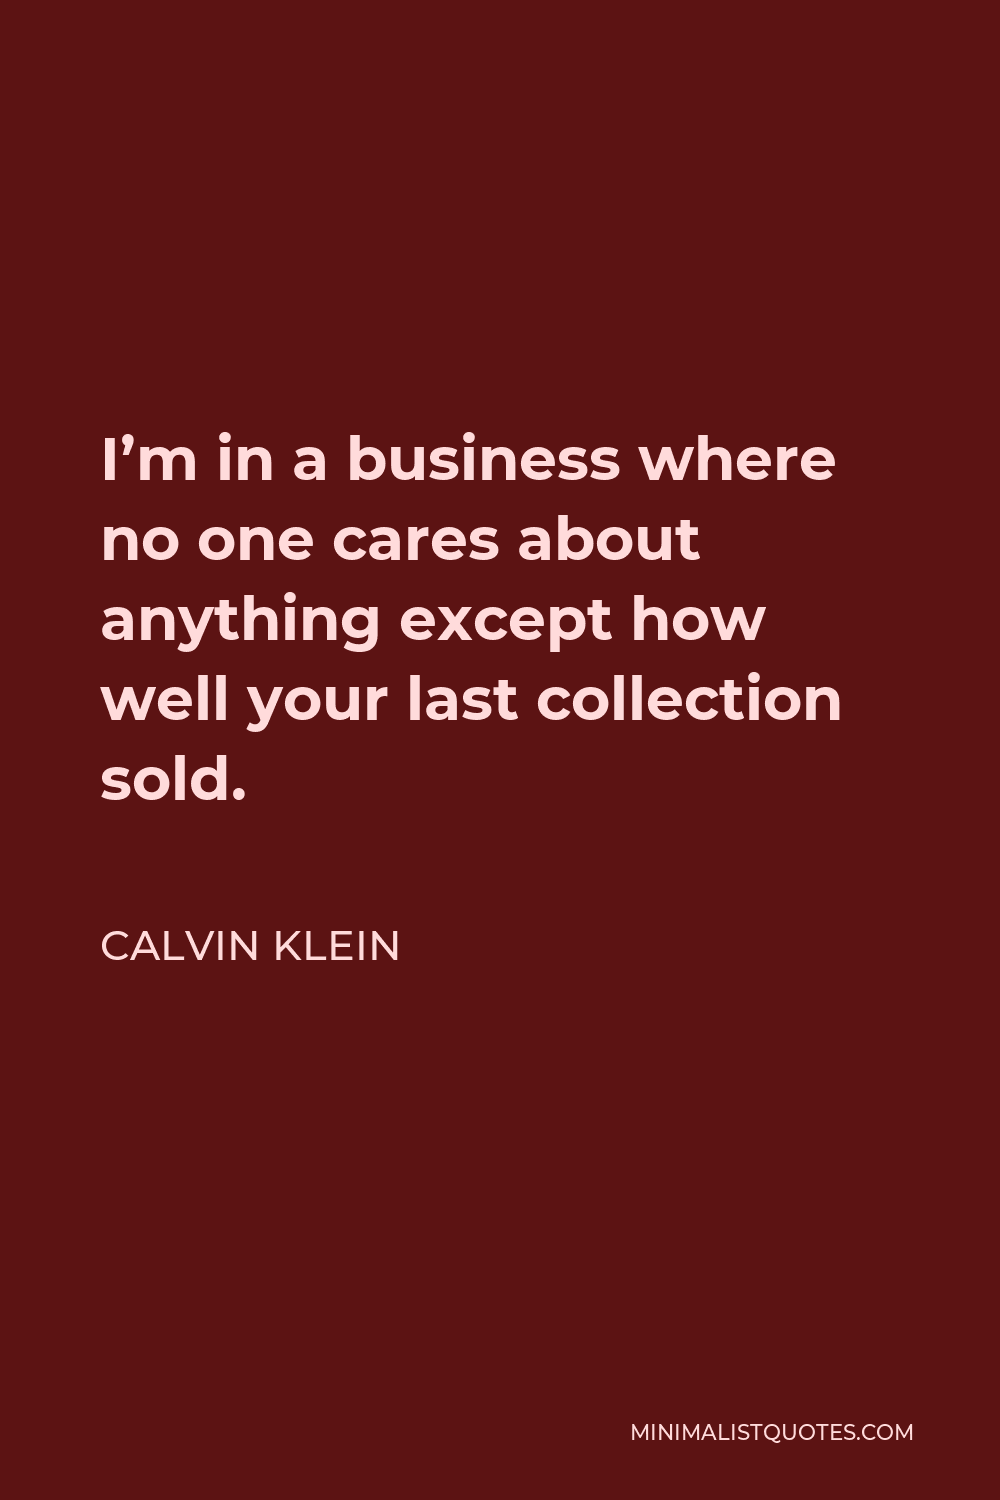 Calvin Klein Quote - I’m in a business where no one cares about anything except how well your last collection sold.